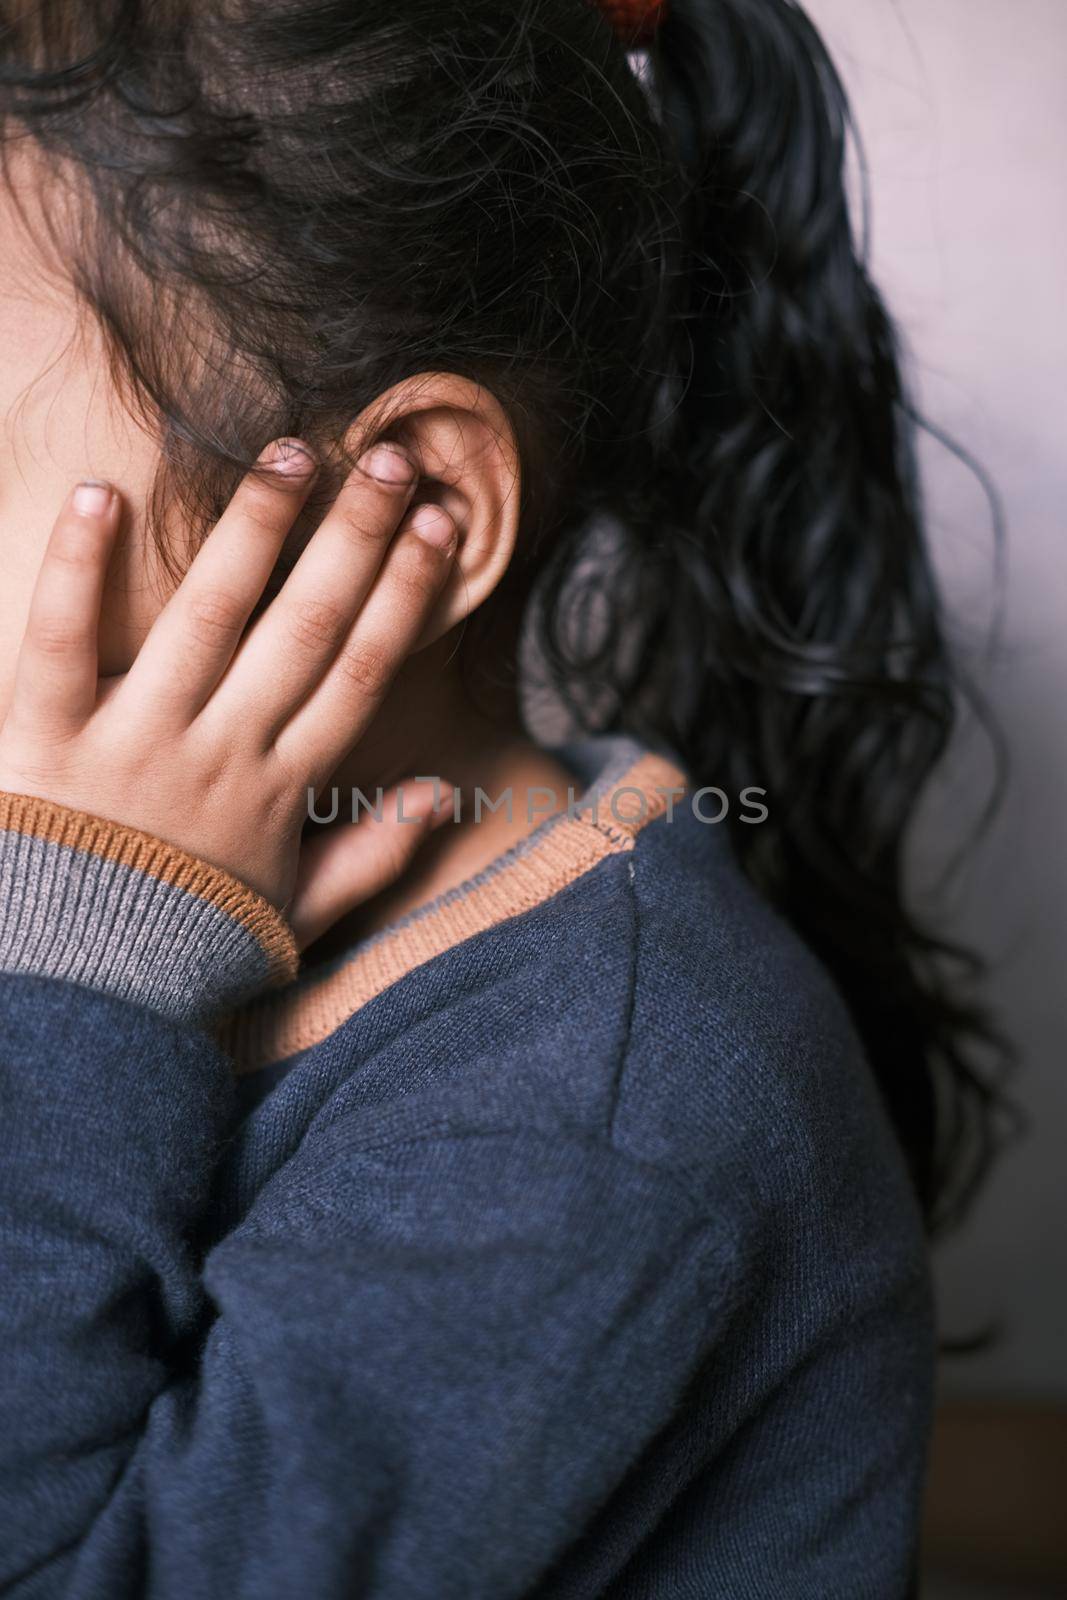 child girl having ear pain touching his painful ear ,.